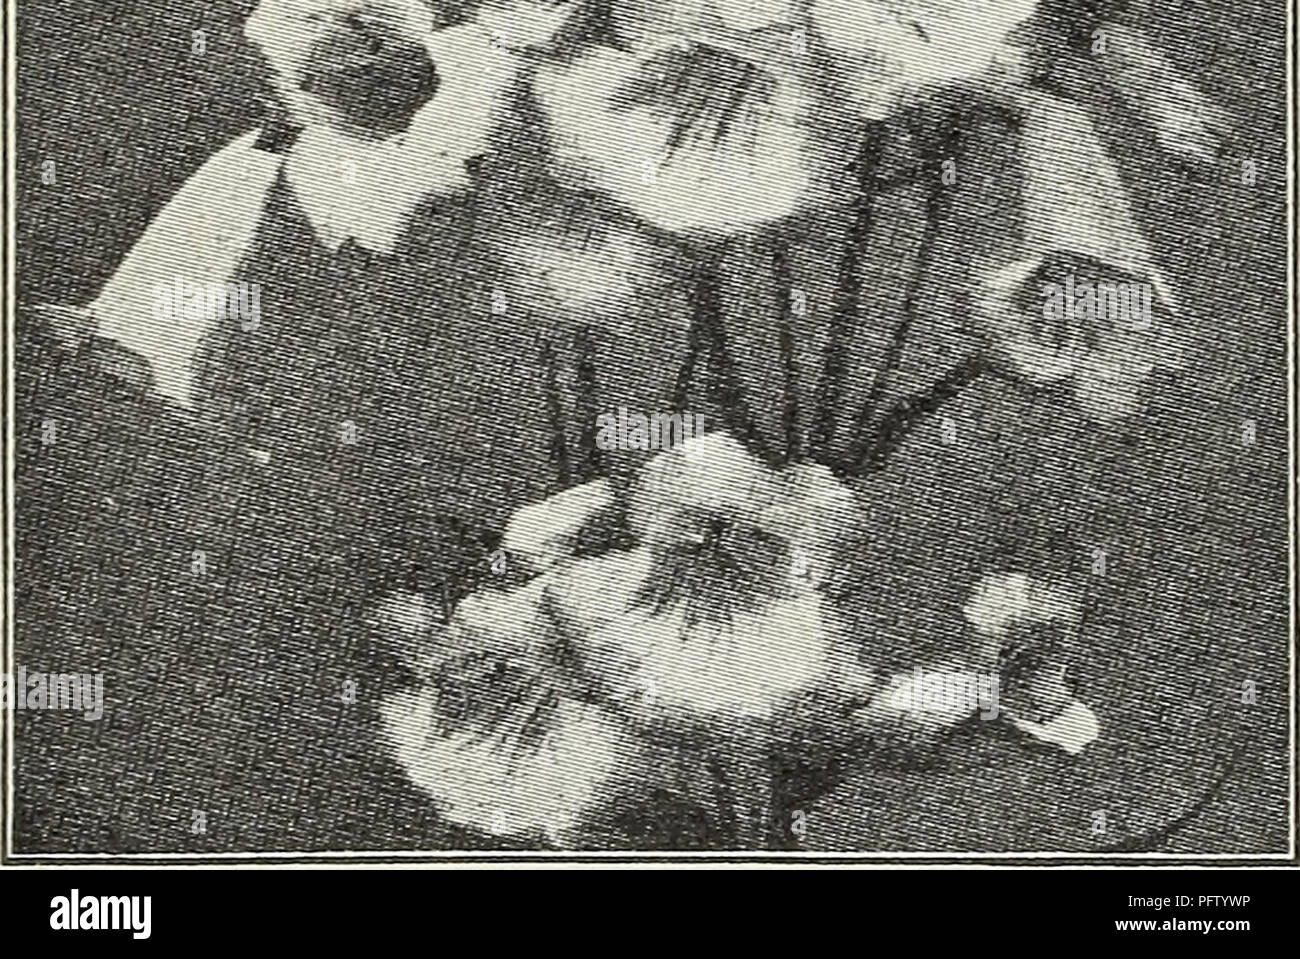 . Currie's autumn 1929 54th year bulbs and plants. Flowers Seeds Catalogs; Bulbs (Plants) Seeds Catalogs; Nurseries (Horticulture) Catalogs; Plants, Ornamental Catalogs. wB^ta ^; ^. RANUNCULUS (Buttercup) Acris fl. pi.—Double golden-yellow flowers. Repens, fl. pi.—A creeping variety with golden-yellow flowers. Price, each, 25c; per doz., ^2.50. RUDEBECKIA (Cone Flowers) Fulgida—Orange yellow with black center. Golden Glow—Grows 6 feet high, bearing masses of double golden-yellow flowers. Purpurea—Large, reddish-purple flowers with brown cone. Price, each, 25c; per dozen, ^2.50. SALVIA (Meadow  Stock Photo